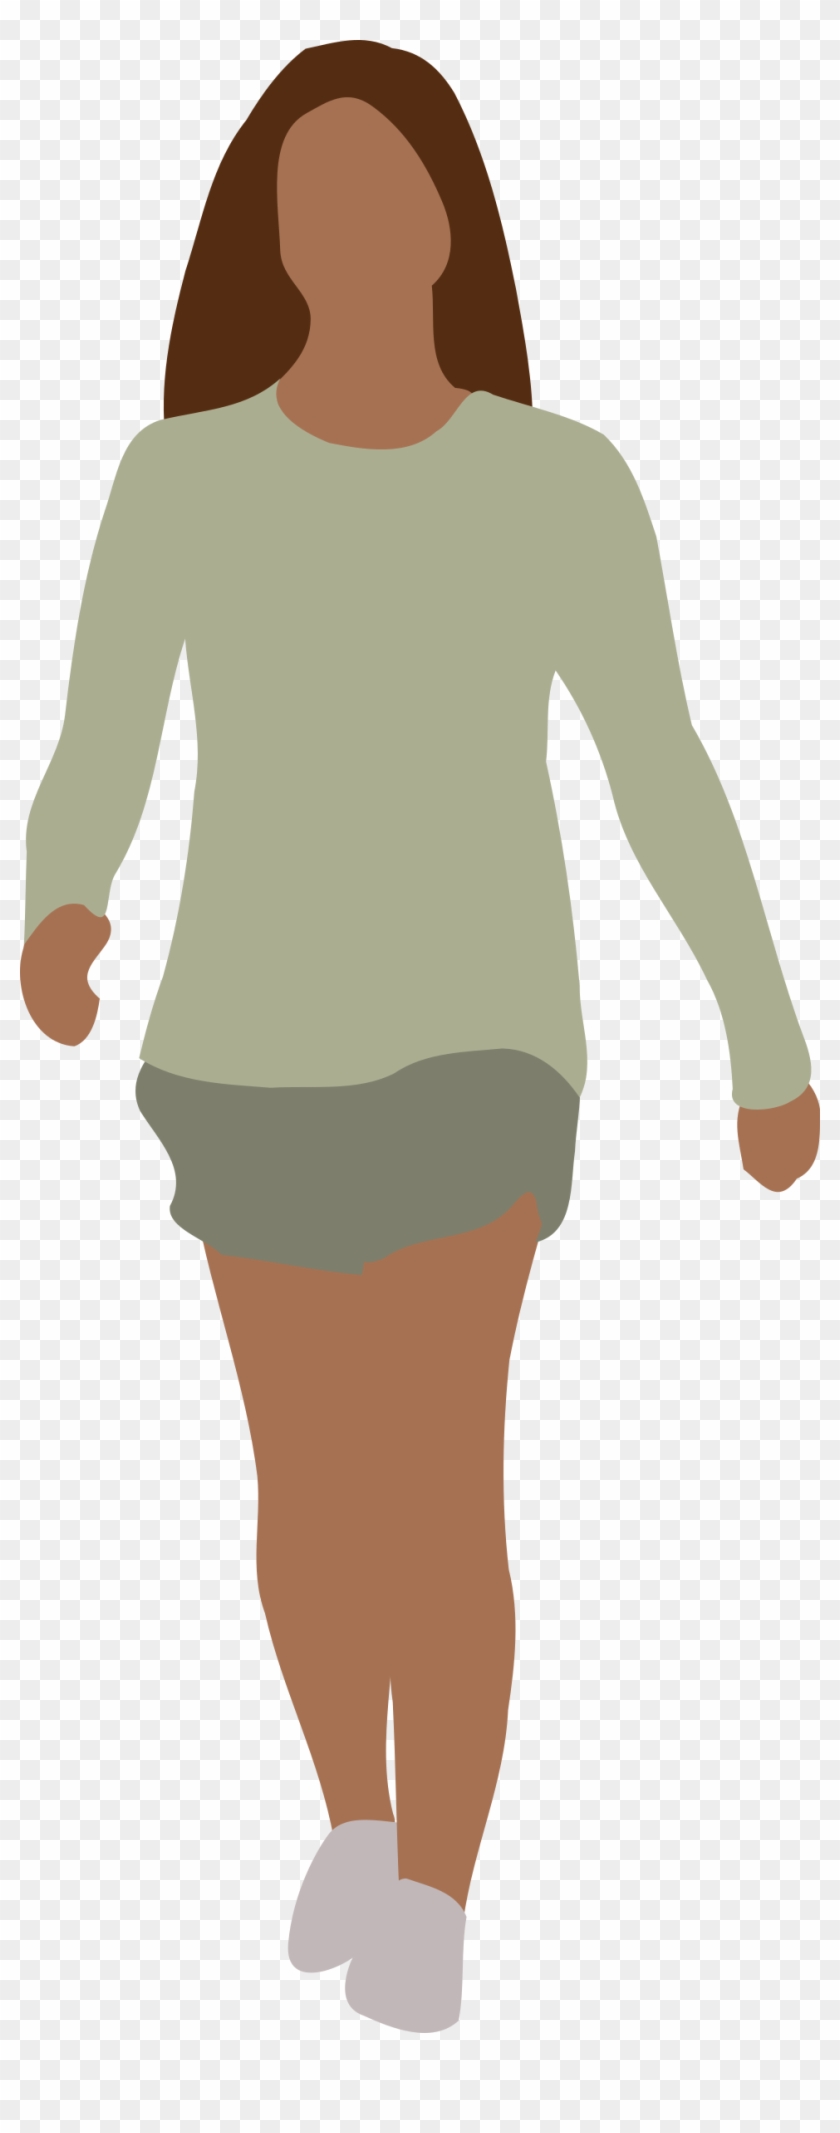 This Free Icons Png Design Of Faceless Woman Walking Clipart #17870